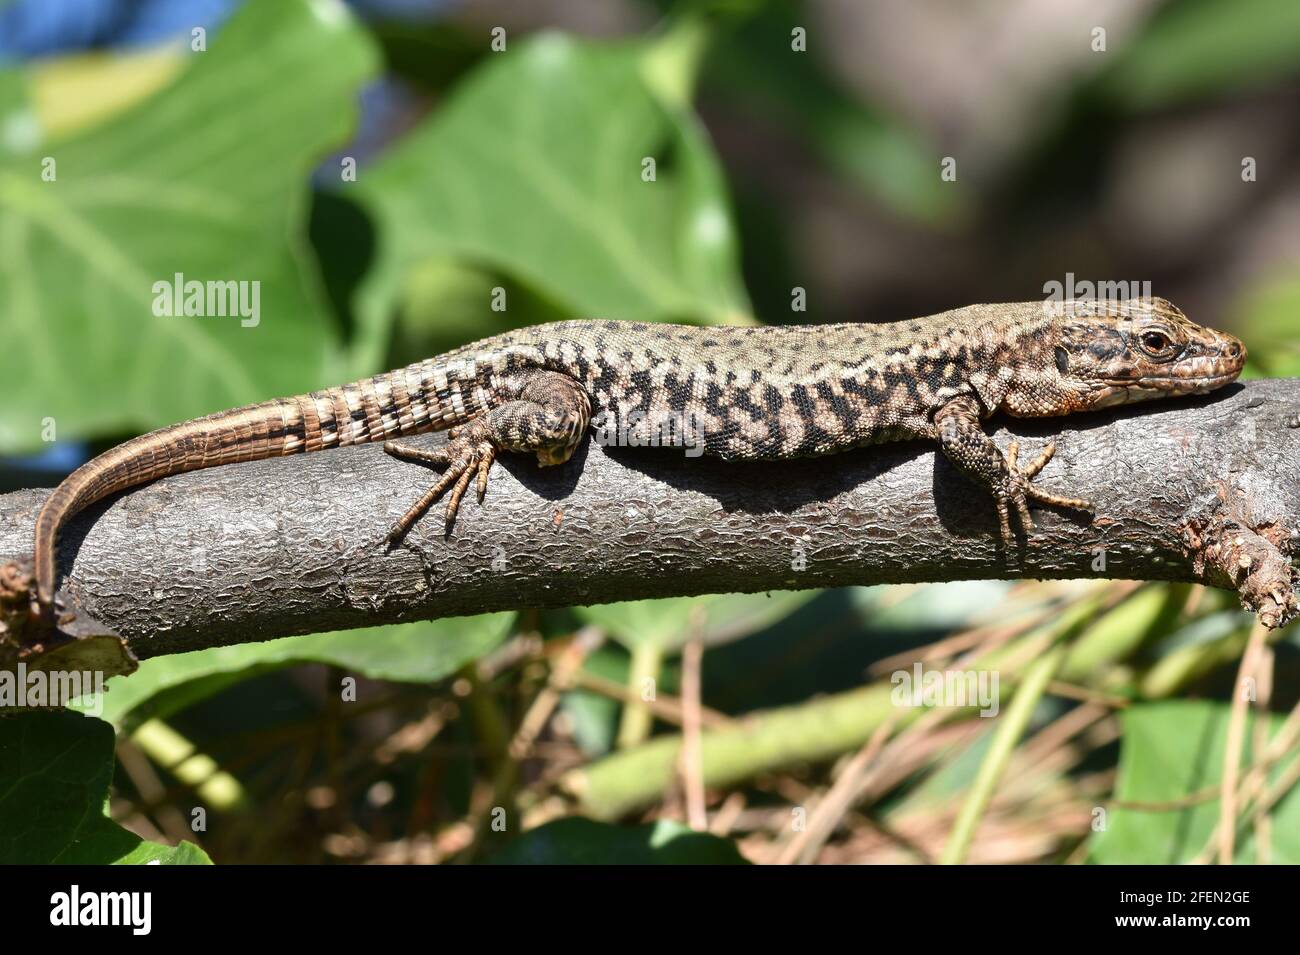 France, sud-est, the wall lizard is a reptile of about twenty centimeters with a longitudinal body and a long tail. Stock Photo